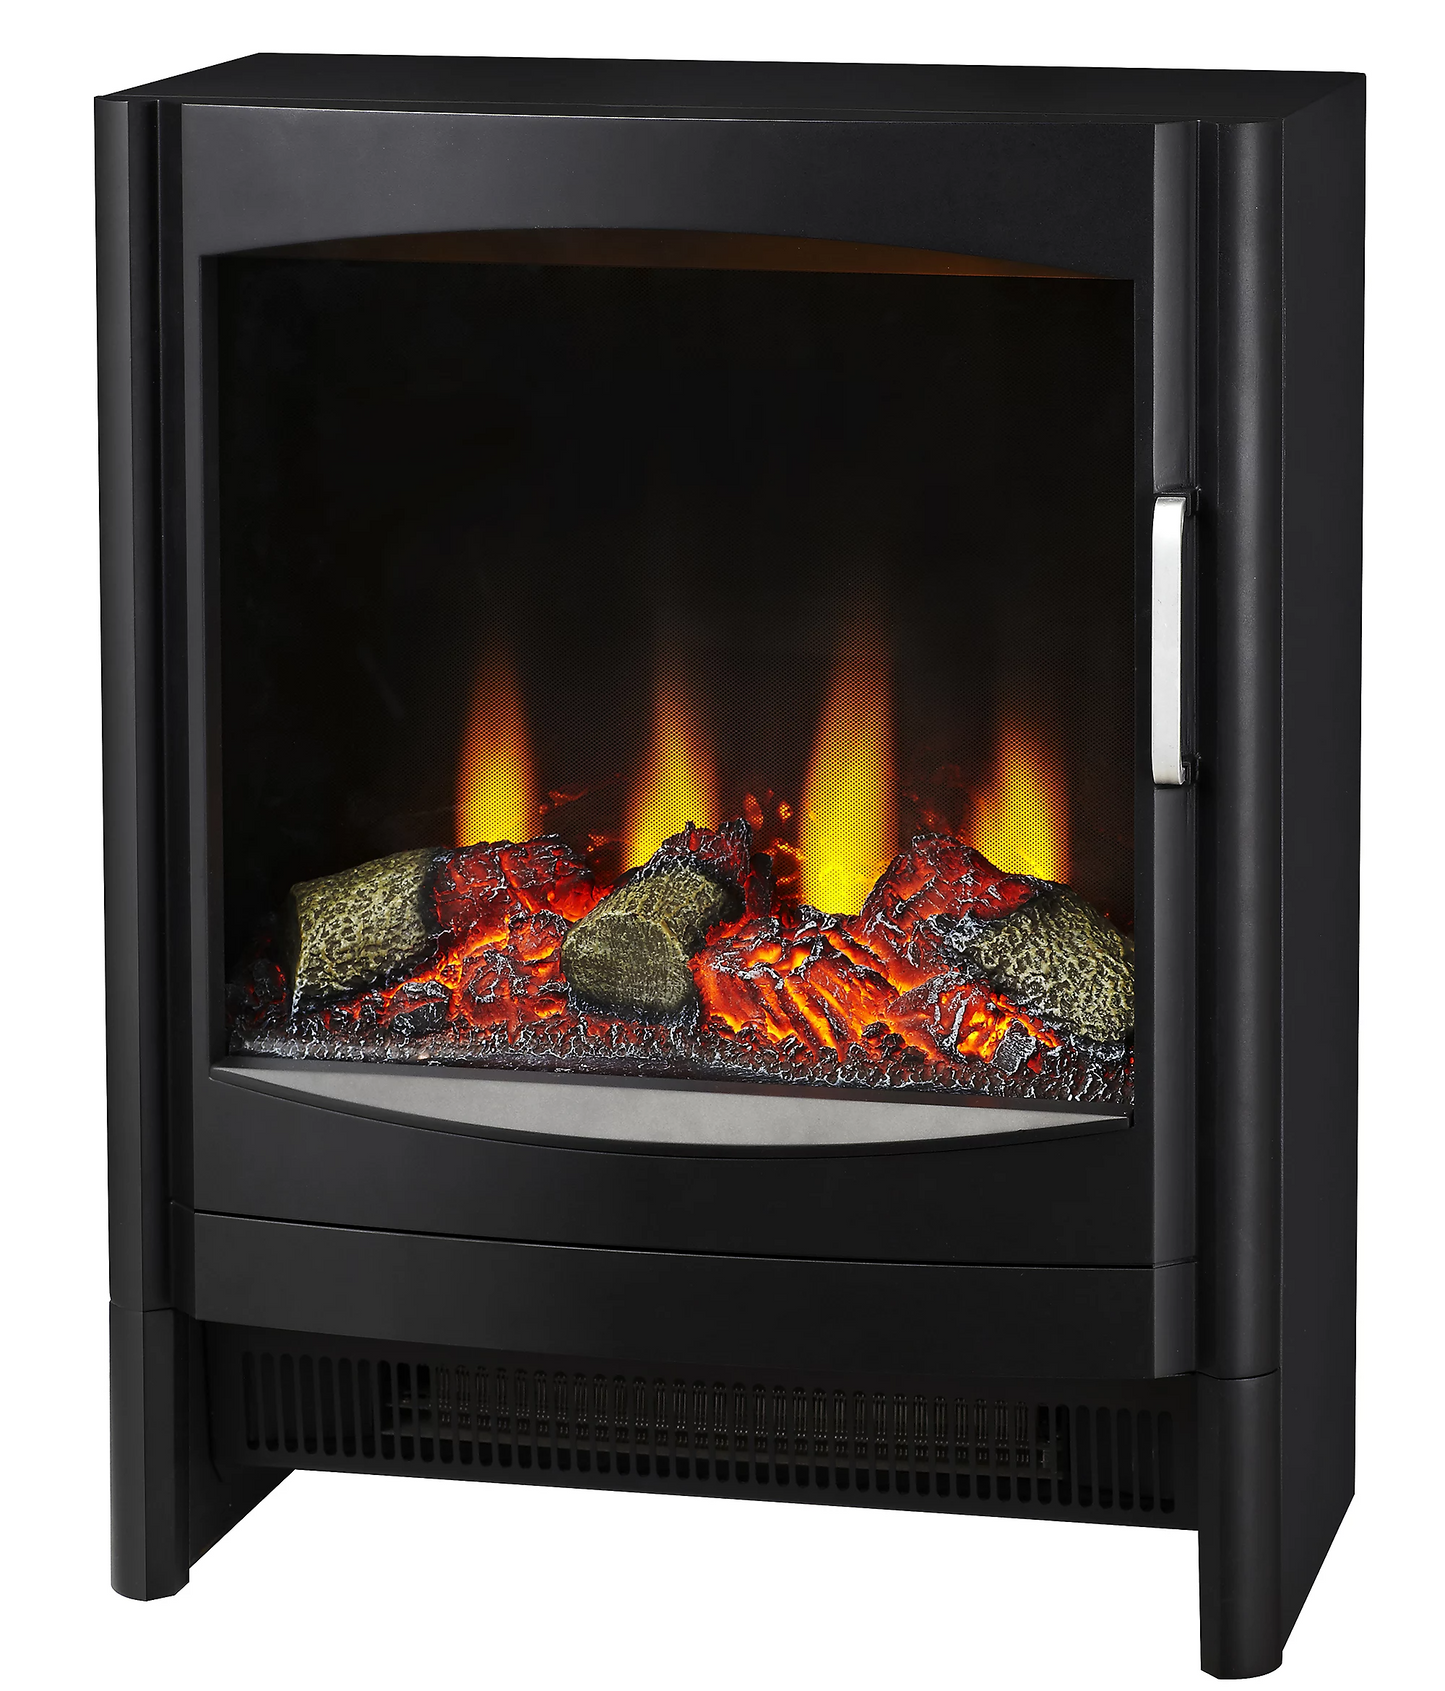 Focal Point Gothenburg 2kW Electric Stove in Black - Second